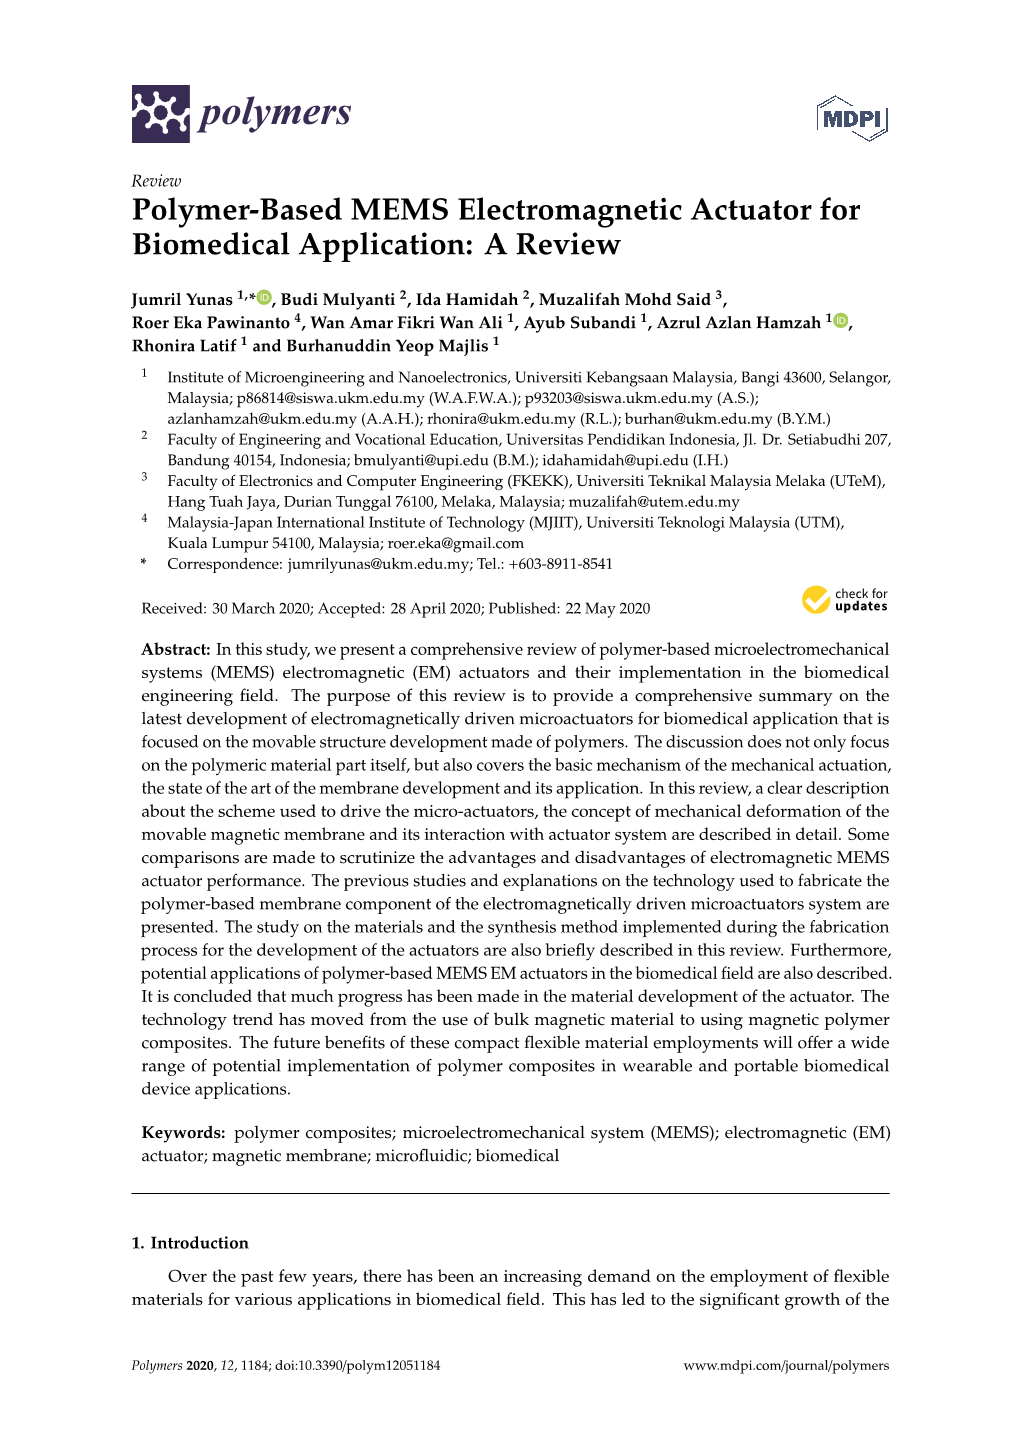 Polymer-Based MEMS Electromagnetic Actuator for Biomedical Application: a Review